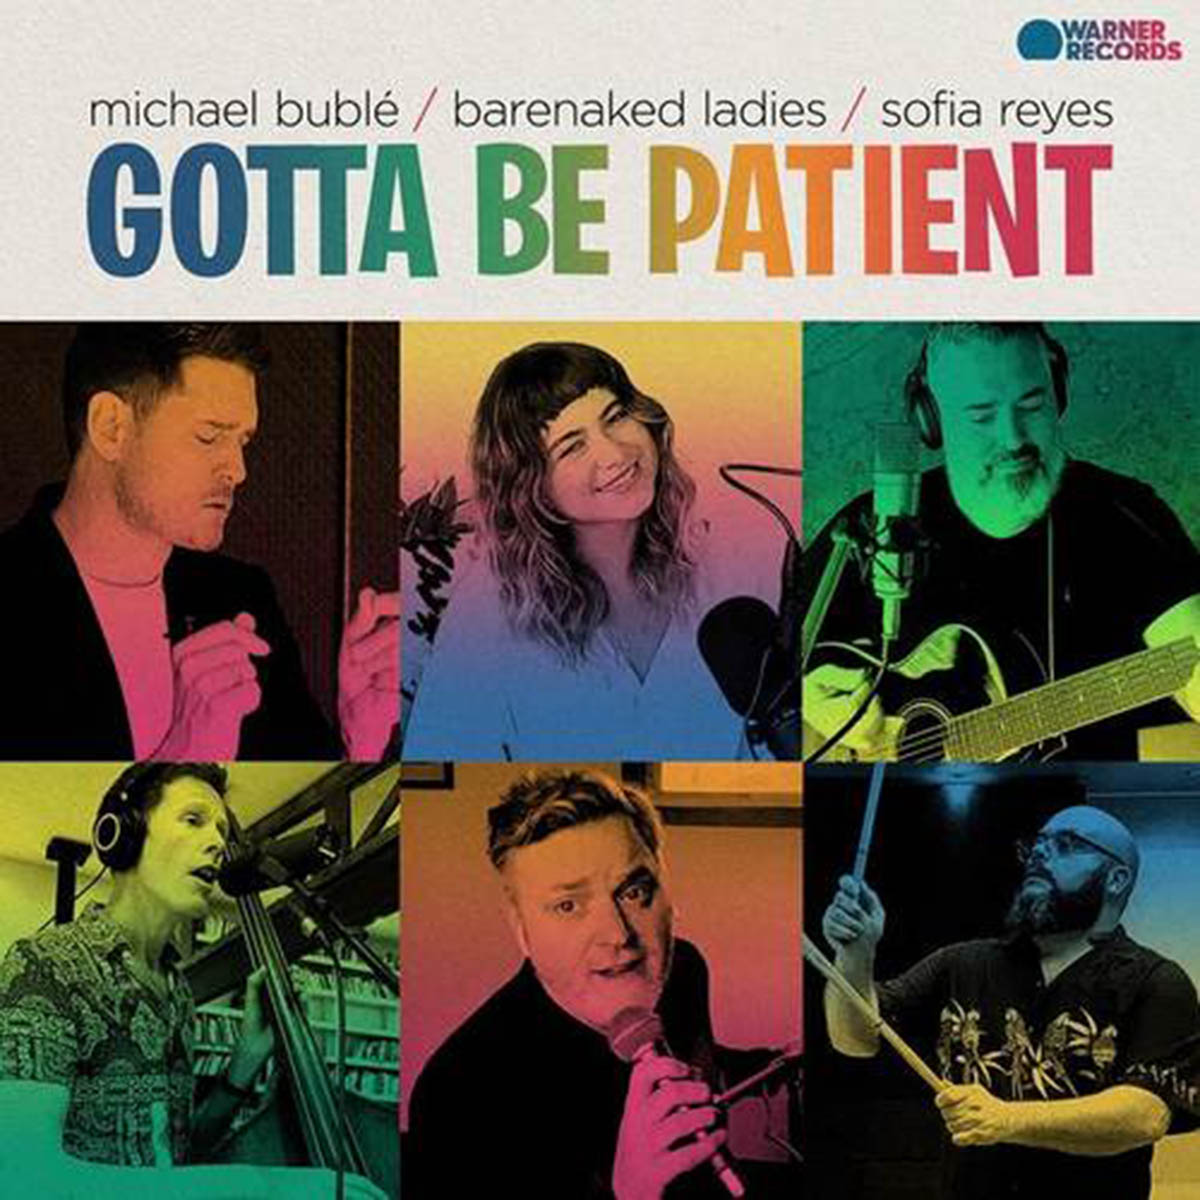 Barenaked Ladies, Michael Buble, Sofia Reyes Team Up On New Single ‘Gotta Be Patient’ Out Today